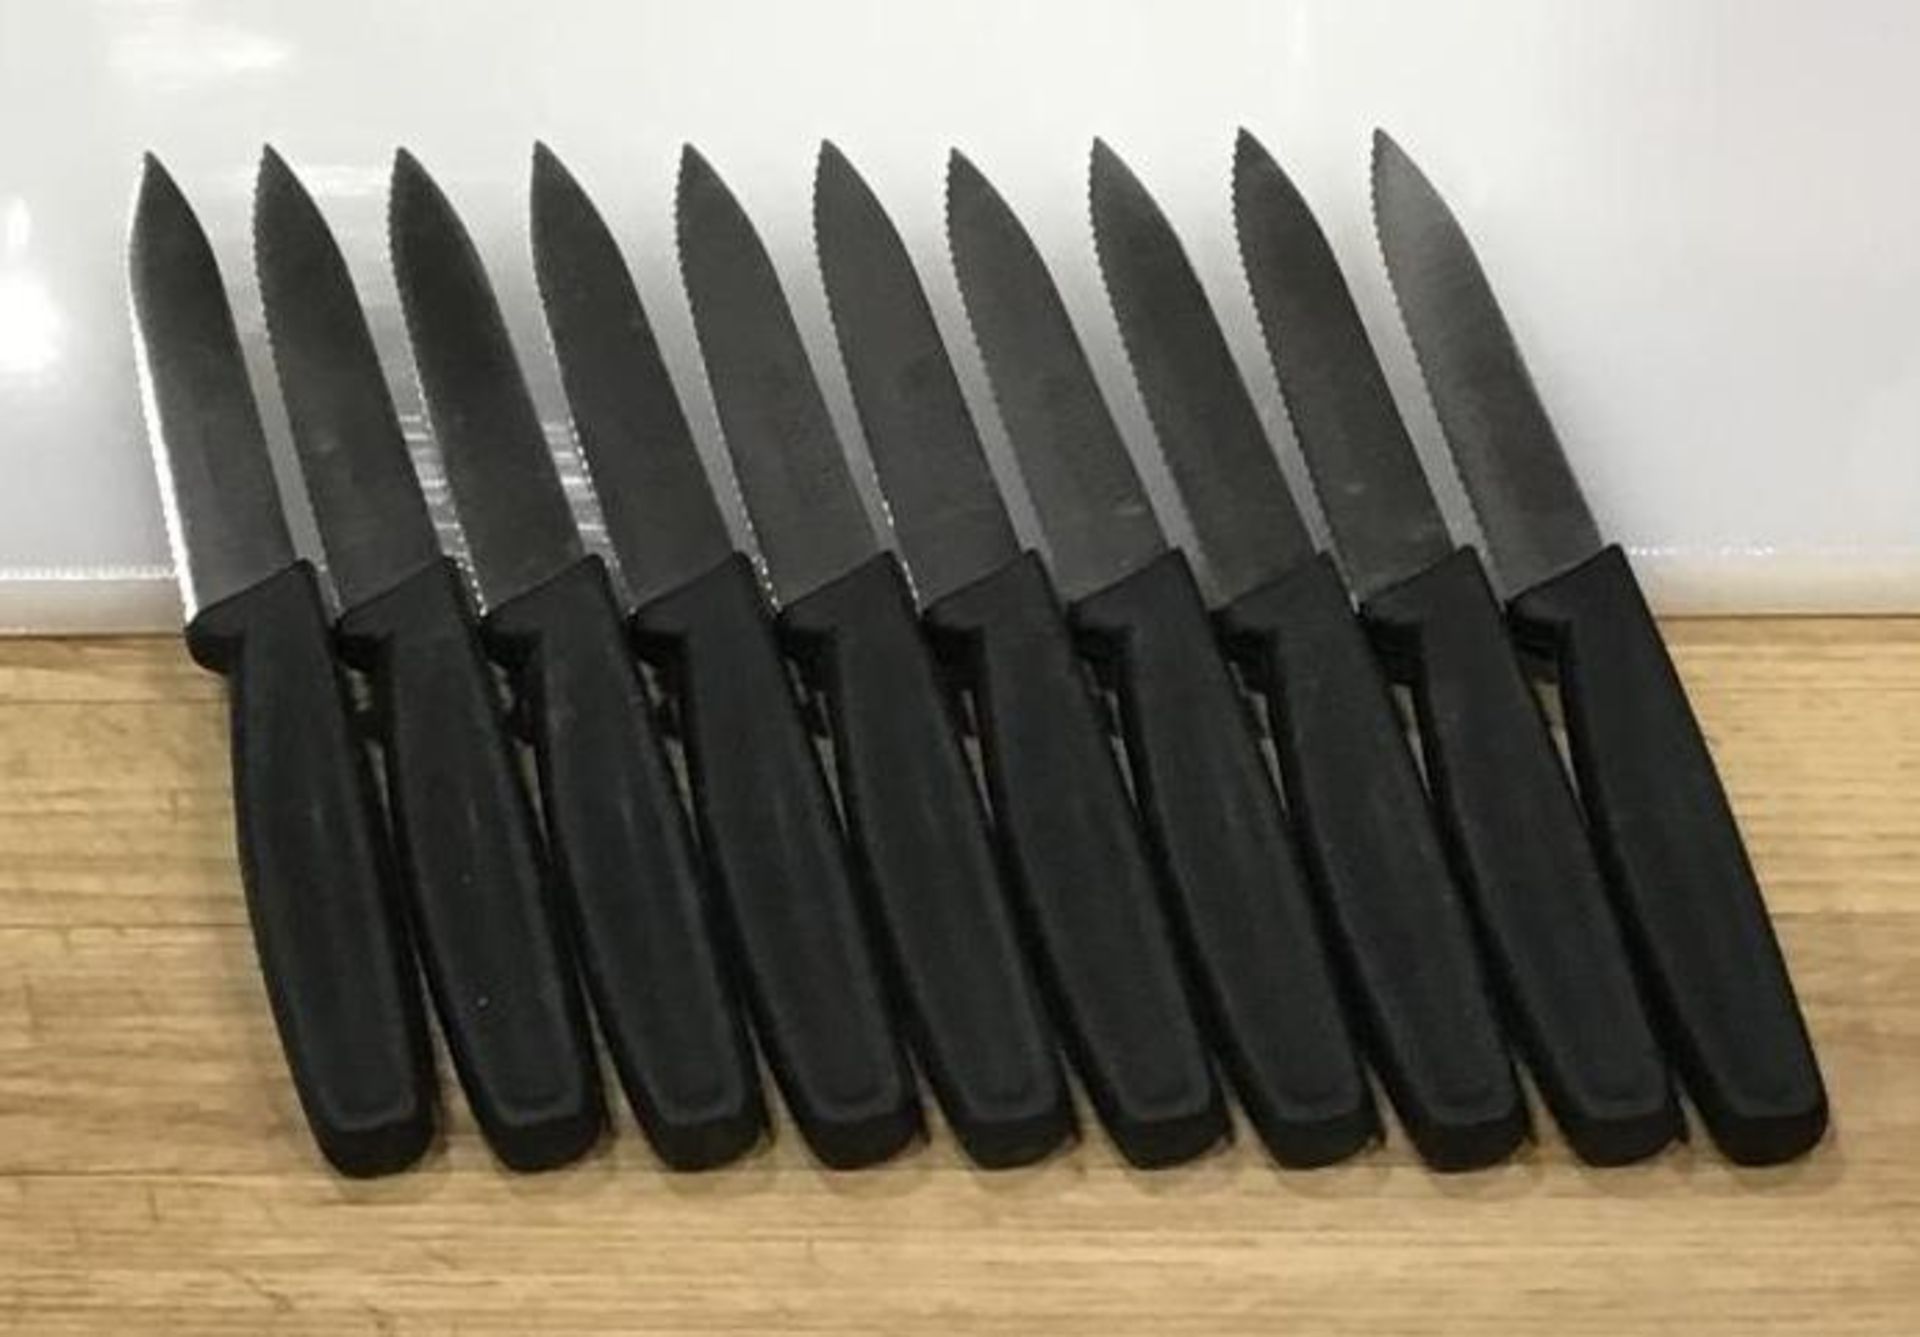 OMCAN 4" WAVE EDGE PARING KNIVES W/BLACK POLY HANDLE - LOT OF 10 - NEW